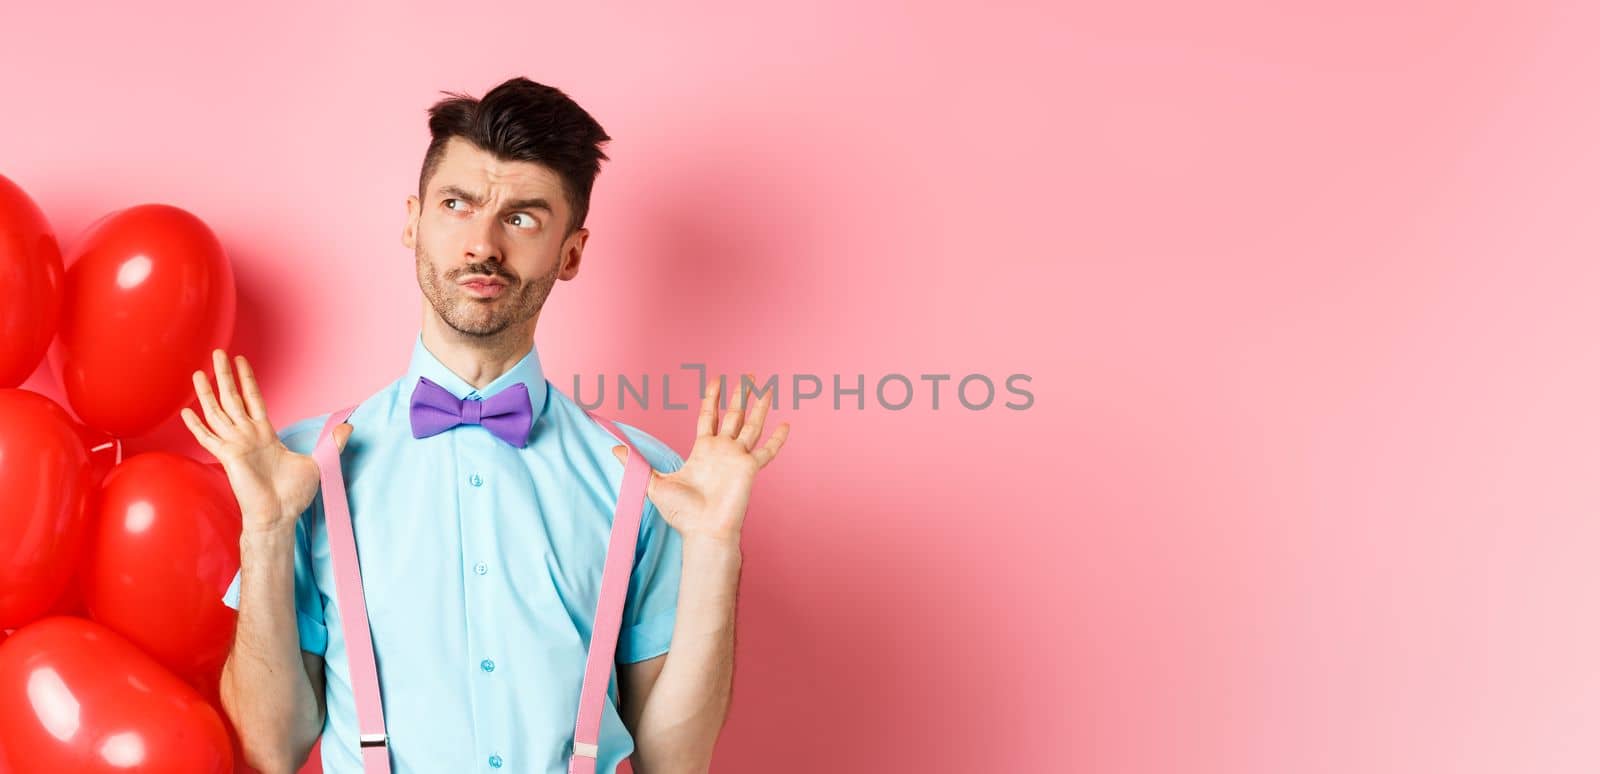 Valentines day concept. Pensive young man in bow-tie, raising hands up and looking left while thinking, making decision, standing on romantic pink background and heart balloons.